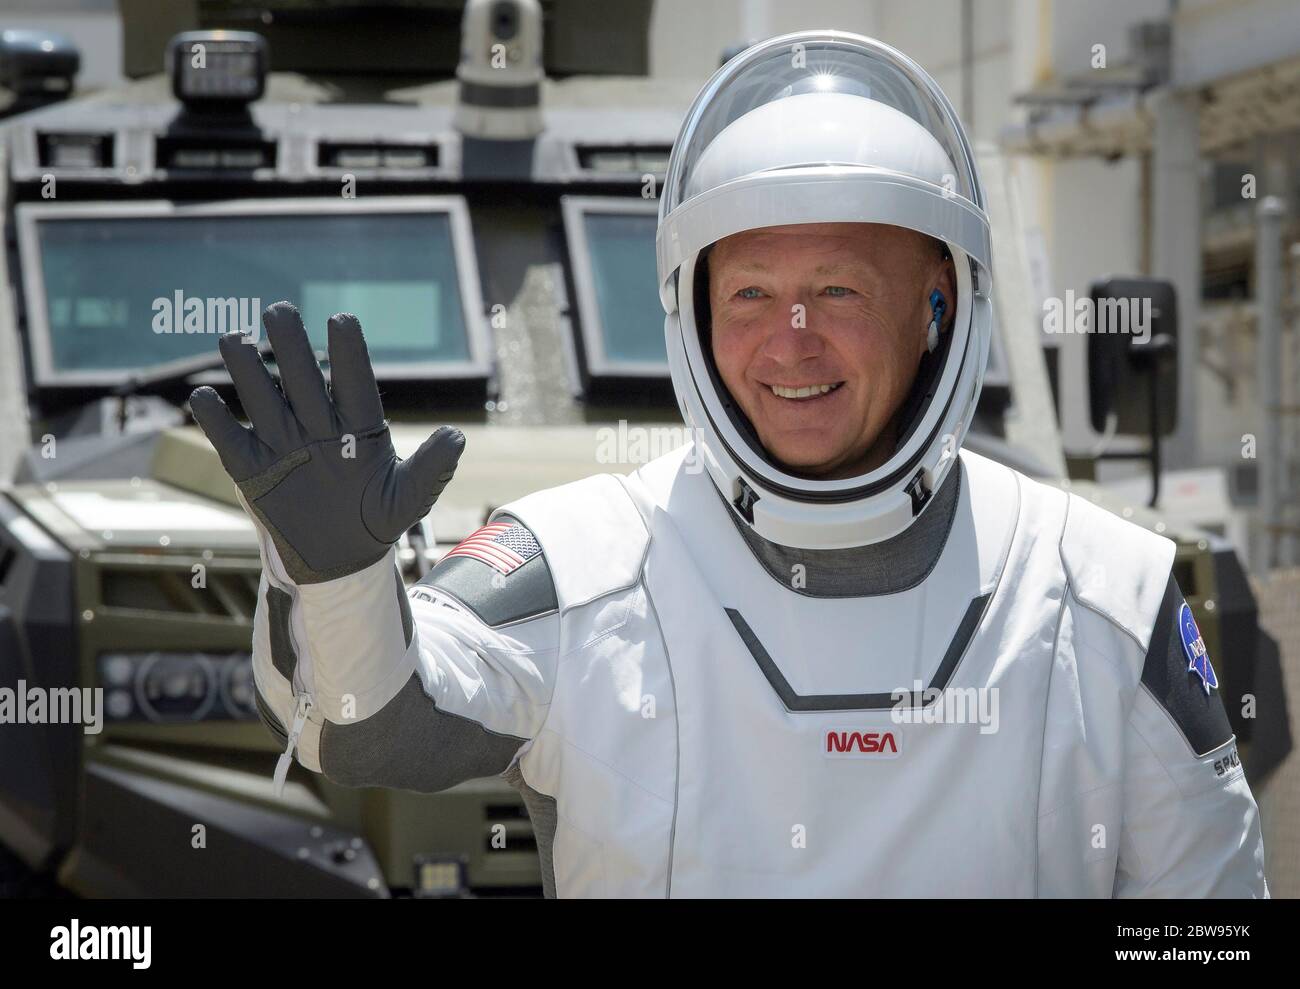 In this photo released by the National Aeronautics and Space Administration (NASA), NASA astronaut Douglas Hurley waves as he and fellow crew member Robert Behnken depart the Neil A. Armstrong Operations and Checkout Building for Launch Complex 39A to board the SpaceX Crew Dragon spacecraft for the Demo-2 mission launch, Saturday, May 30, 2020, at NASA's Kennedy Space Center in Florida. NASA's SpaceX Demo-2 mission is the first launch with astronauts of the SpaceX Crew Dragon spacecraft and Falcon 9 rocket to the International Space Station as part of the agency's Commercial Crew Program. The Stock Photo